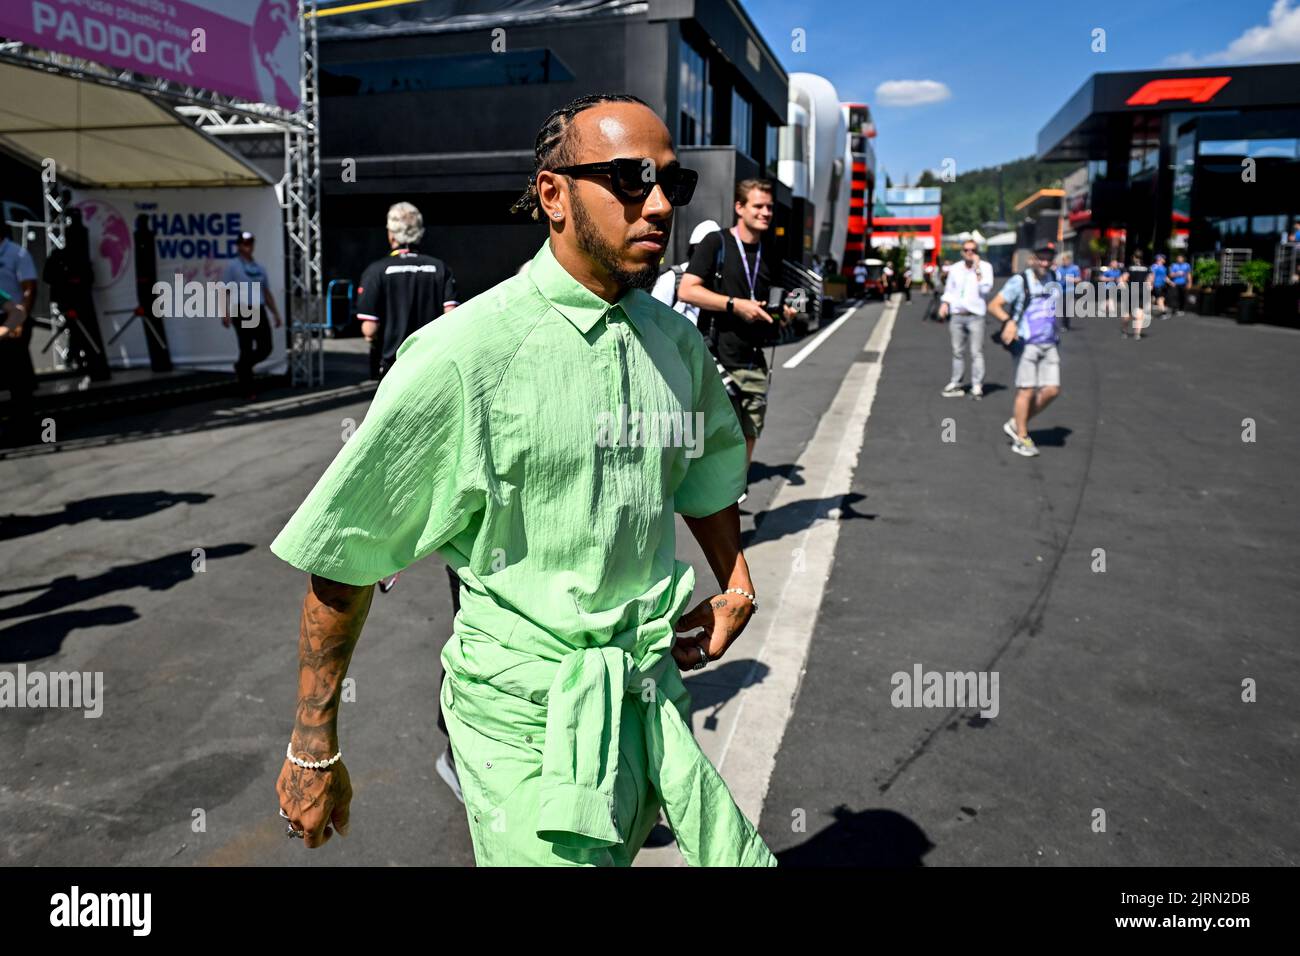 Mercedes-AMG Petronas UK rider Lewis Hamilton pictured during preparations for the Grand Prix F1 of Belgium race, in Spa-Francorchamps, Wednesday 24 August 2022. The Spa-Francorchamps Formula One Grand Prix takes place this weekend, from August 26th to August 28th. BELGA PHOTO DIRK WAEM Stock Photo